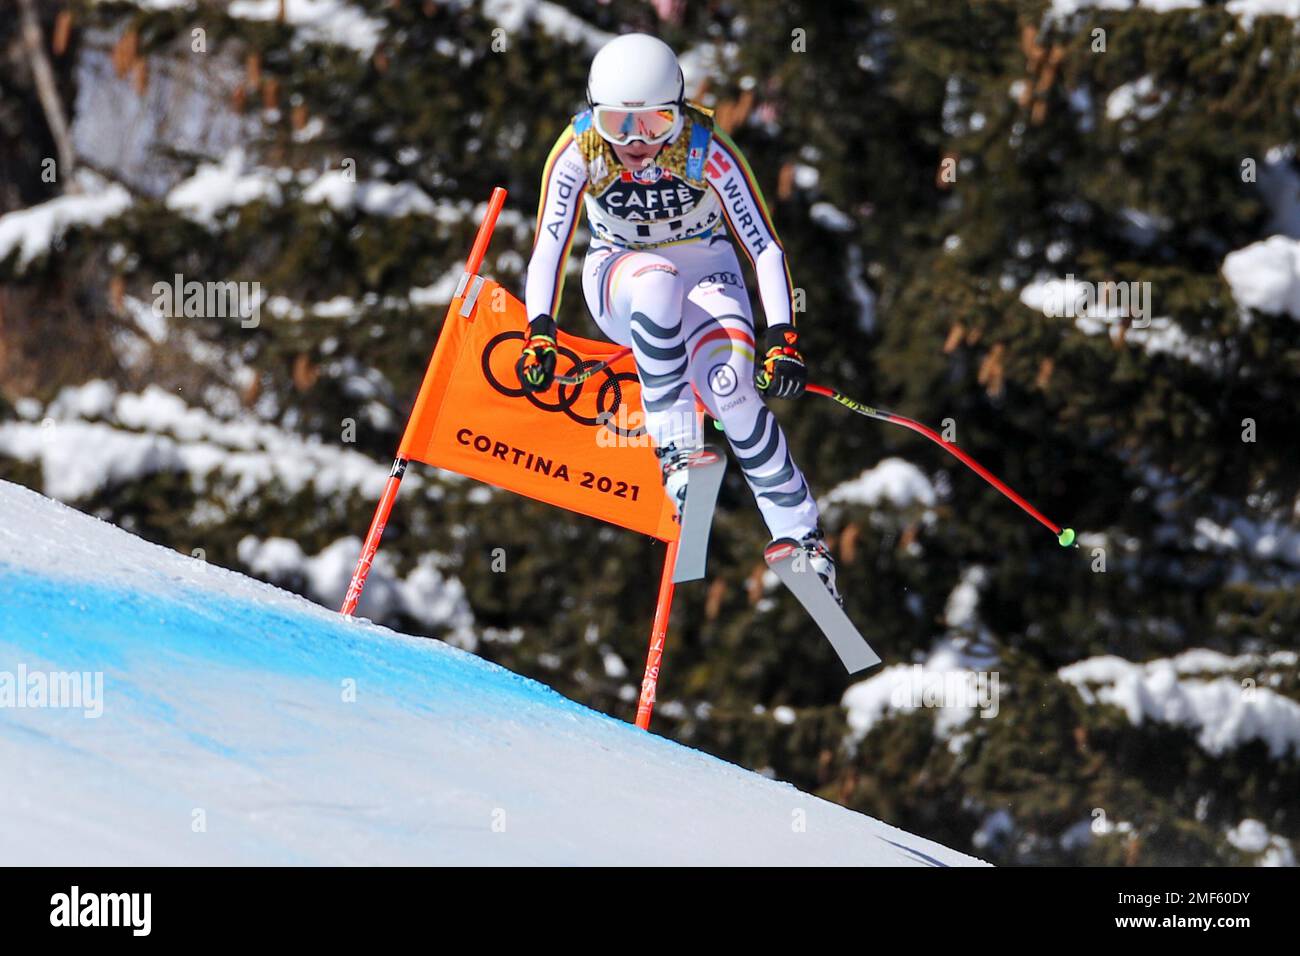 Germanys Kira Weidle speeds down the course during the womens downhill, at the alpine ski World Championships in Cortina dAmpezzo, Italy, Saturday, Feb.13, 2021